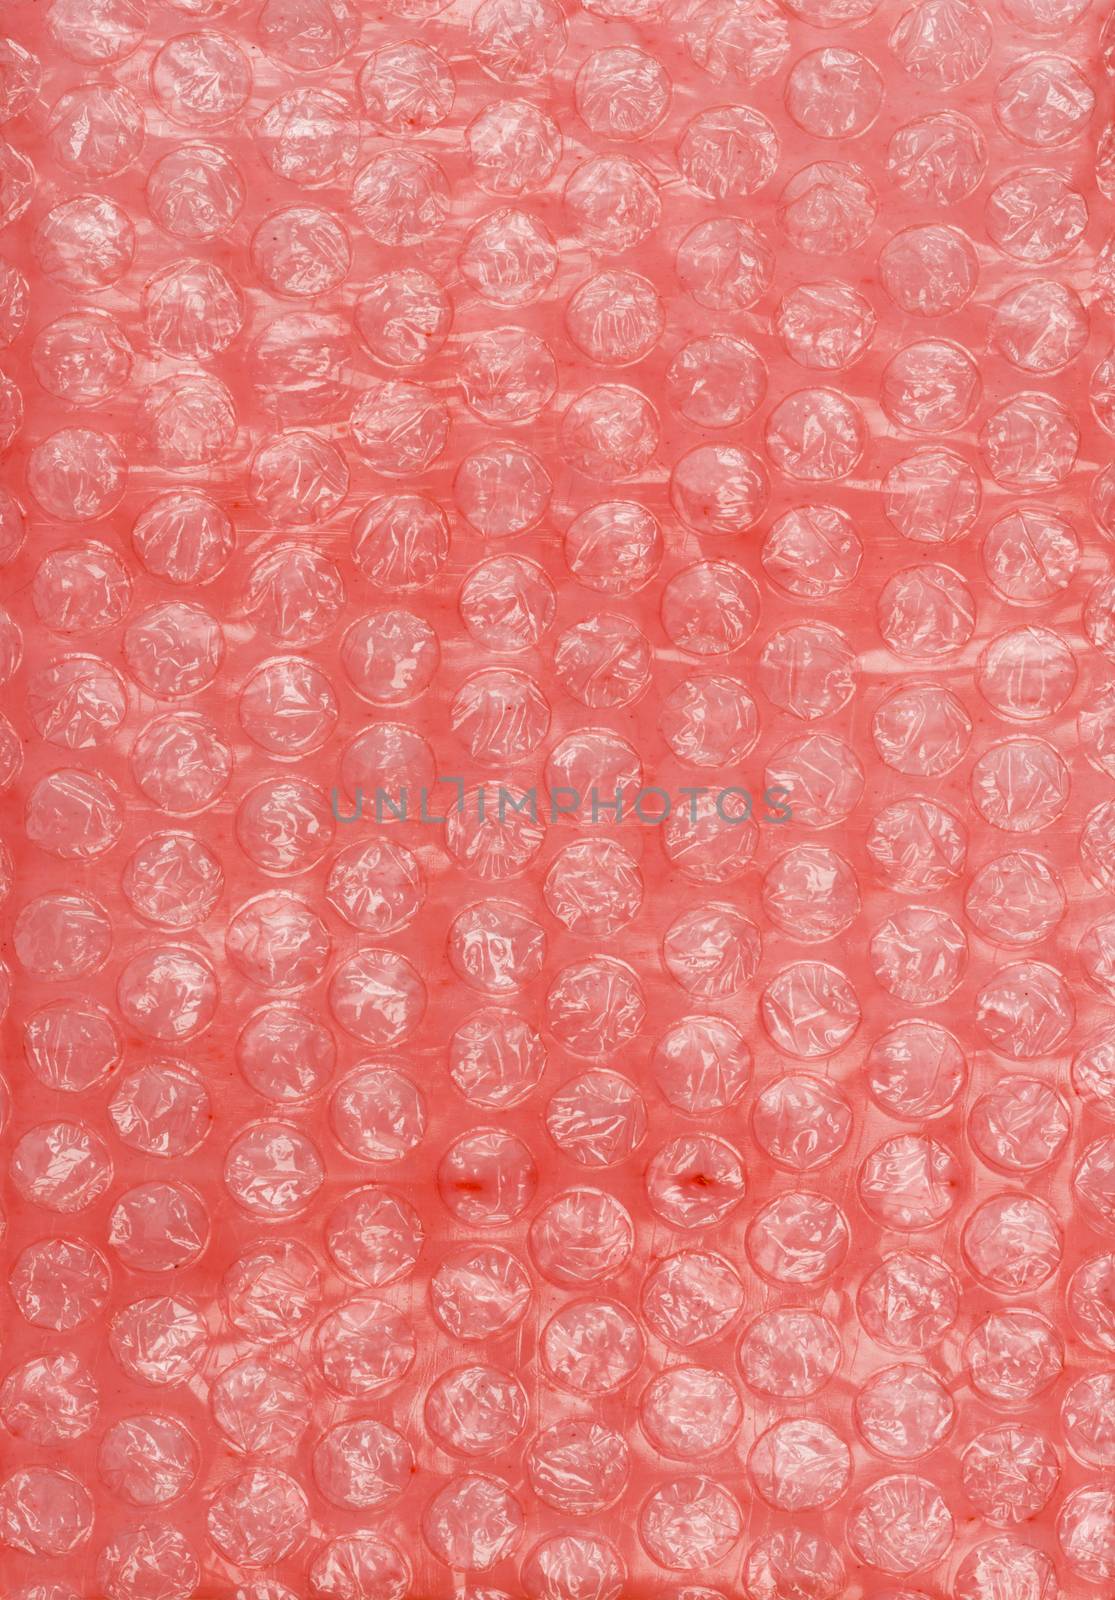 Air-bubble wrap texture on red background, close-up view